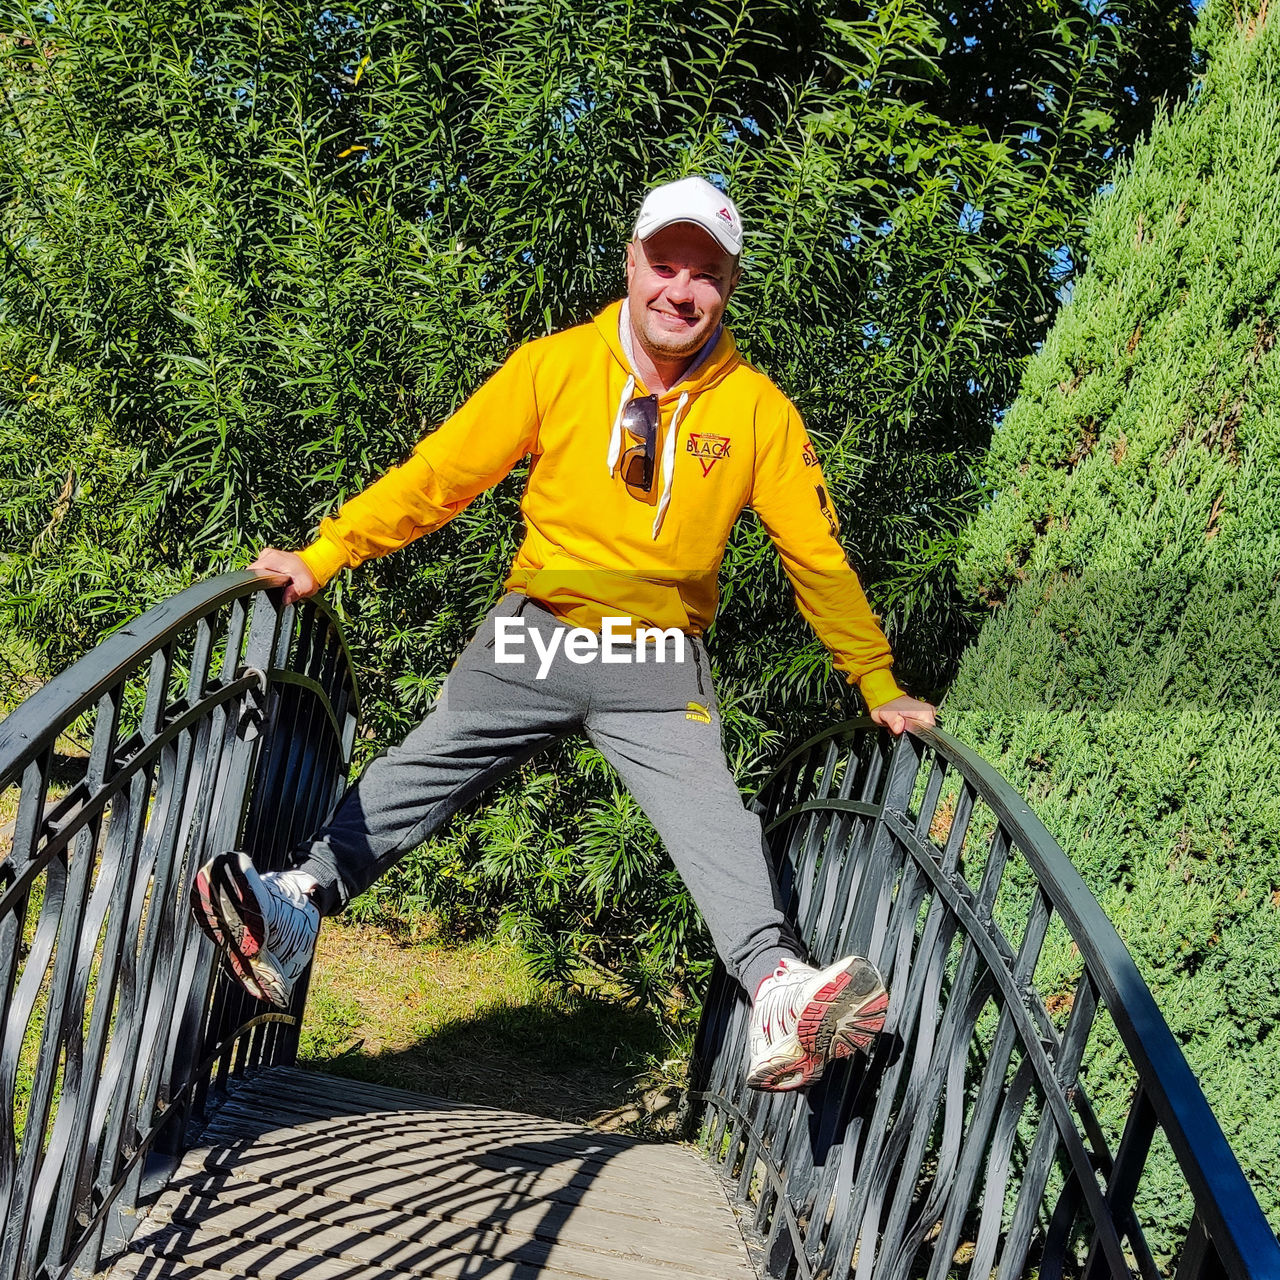 one person, leisure activity, adult, lifestyles, sports, full length, smiling, nature, day, plant, men, front view, happiness, portrait, emotion, looking at camera, railing, casual clothing, outdoors, sunlight, exercising, green, clothing, tree, sports clothing, fun, yellow, vitality, activity, shadow, young adult, sports equipment